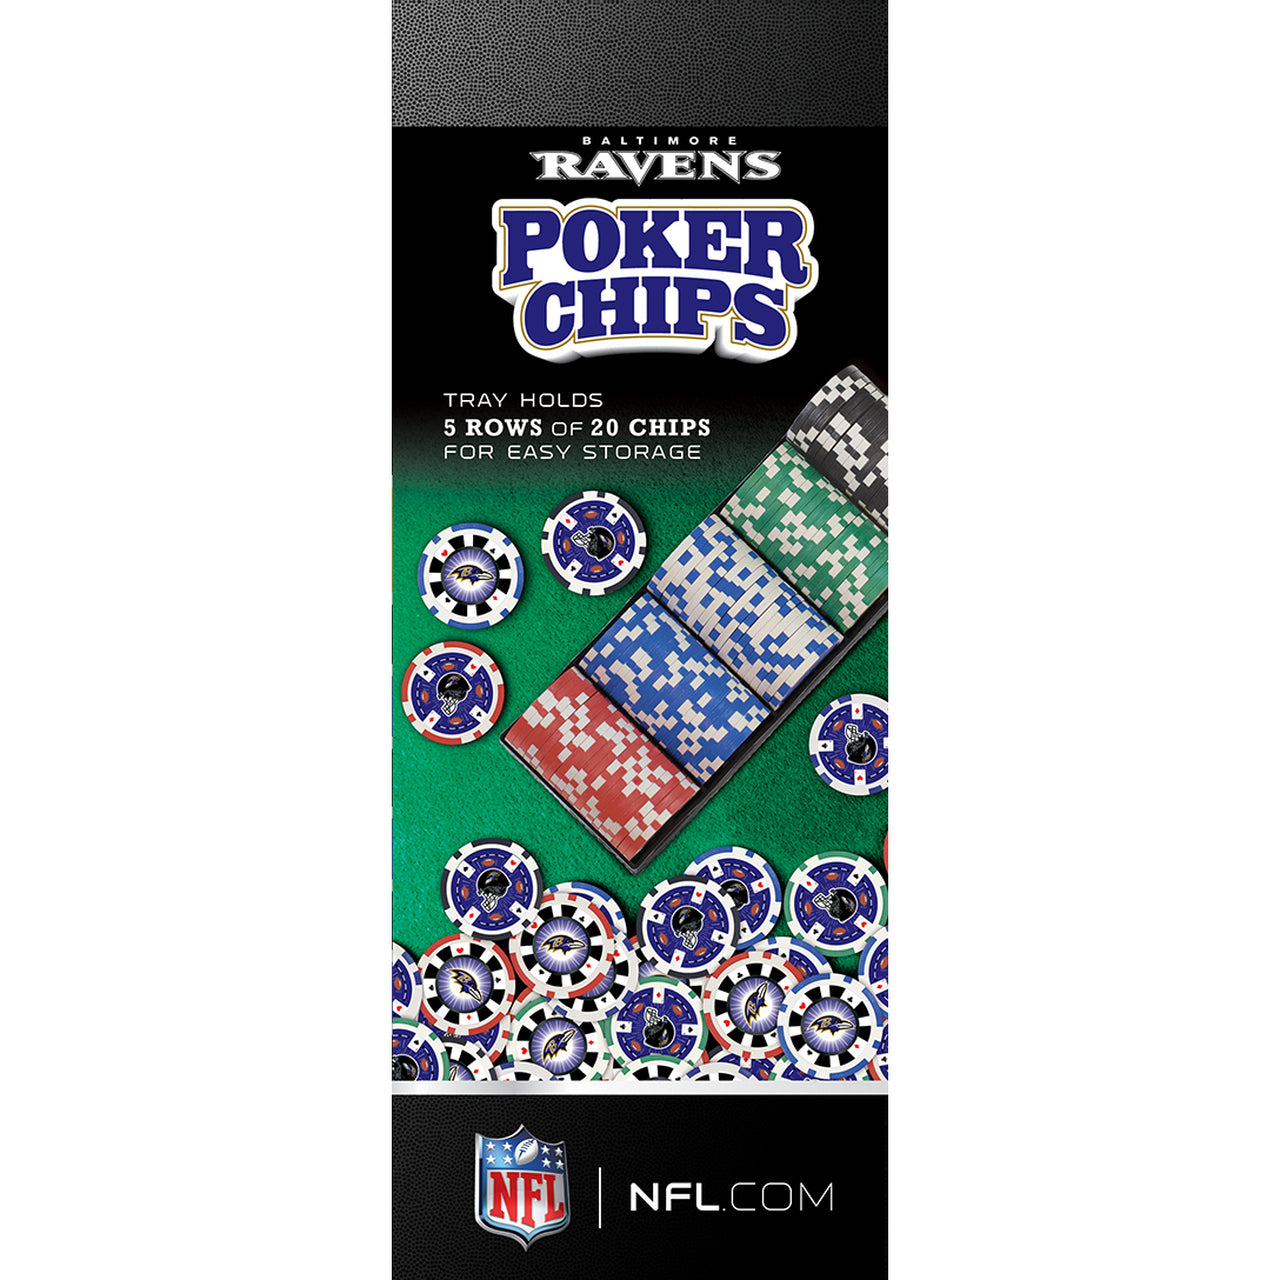 Baltimore Ravens Poker Chips 100 Piece Set by Masterpieces